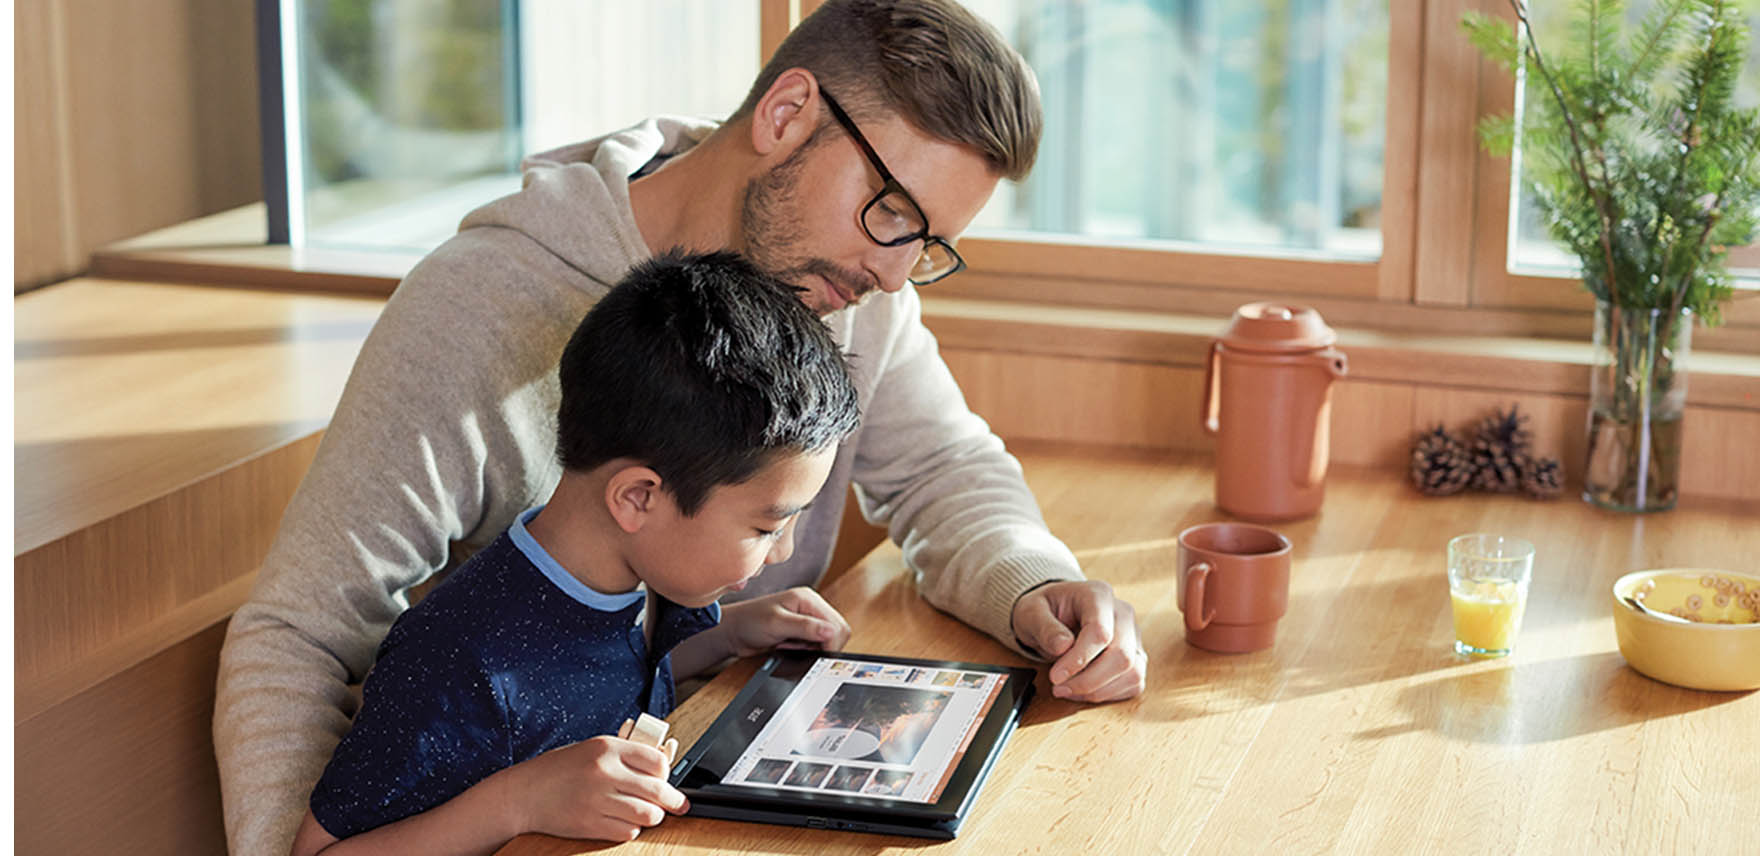 Father and son working together on a tablet device